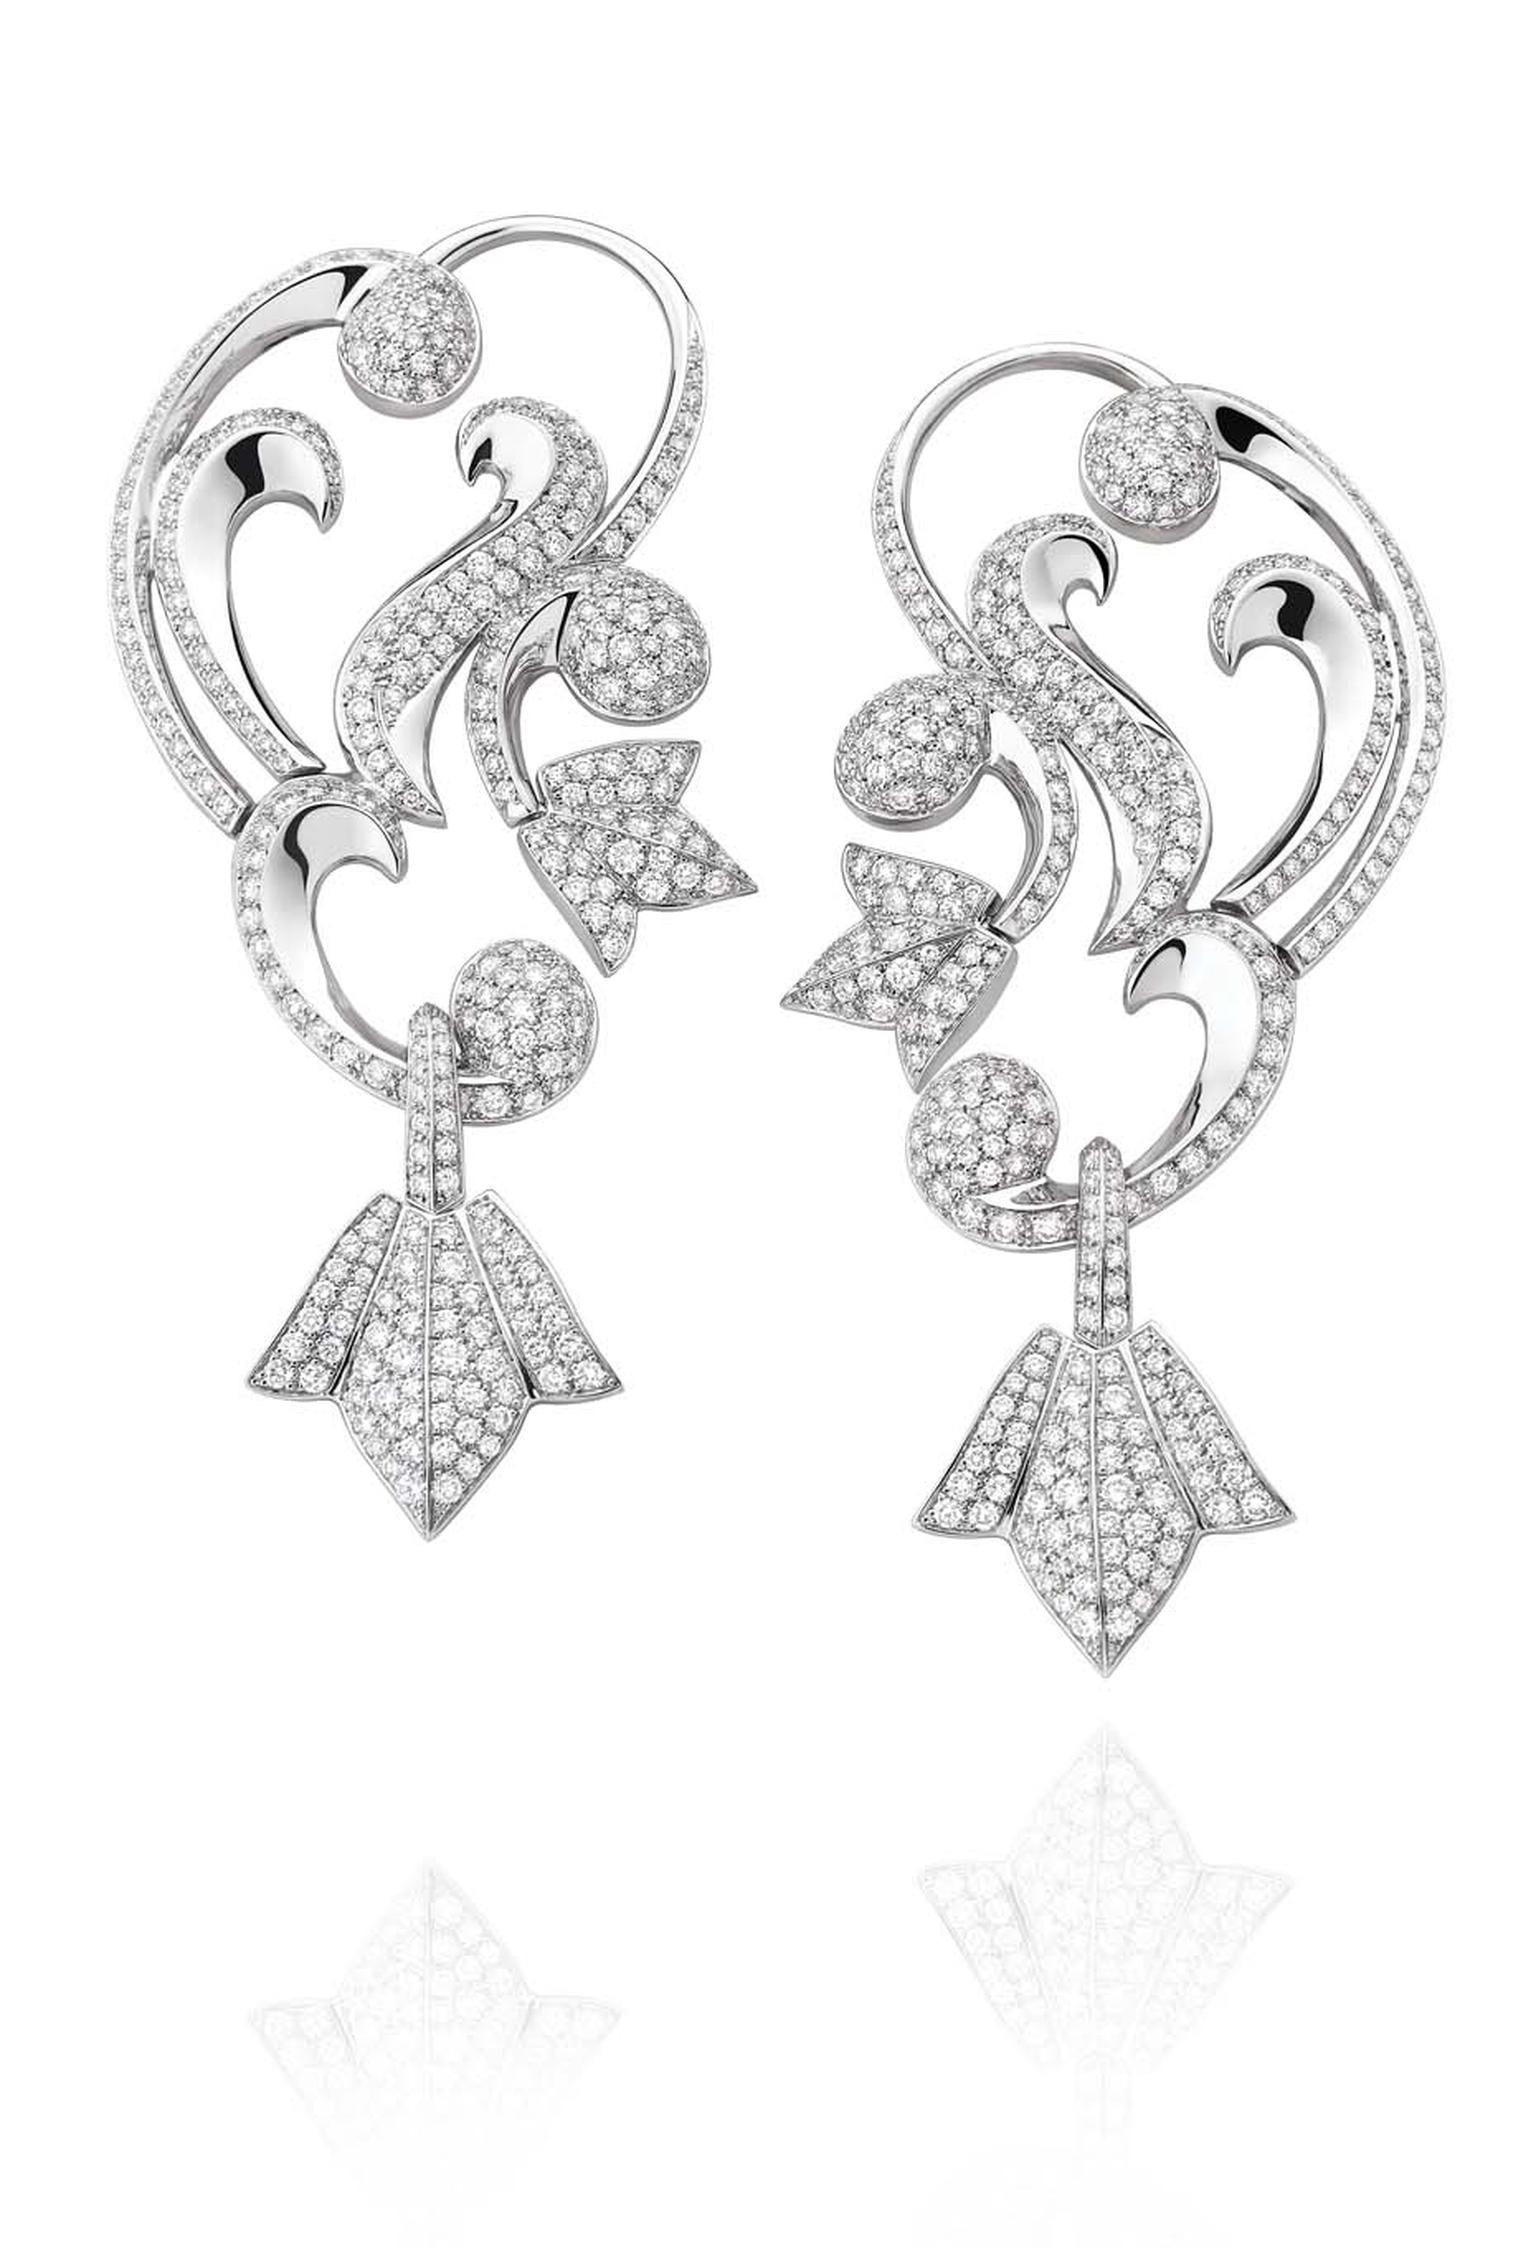 Mellerio dits Meller Secrets de Lys collection diamond ear cuffs in platinum, with swirling arabesques and lily motifs.